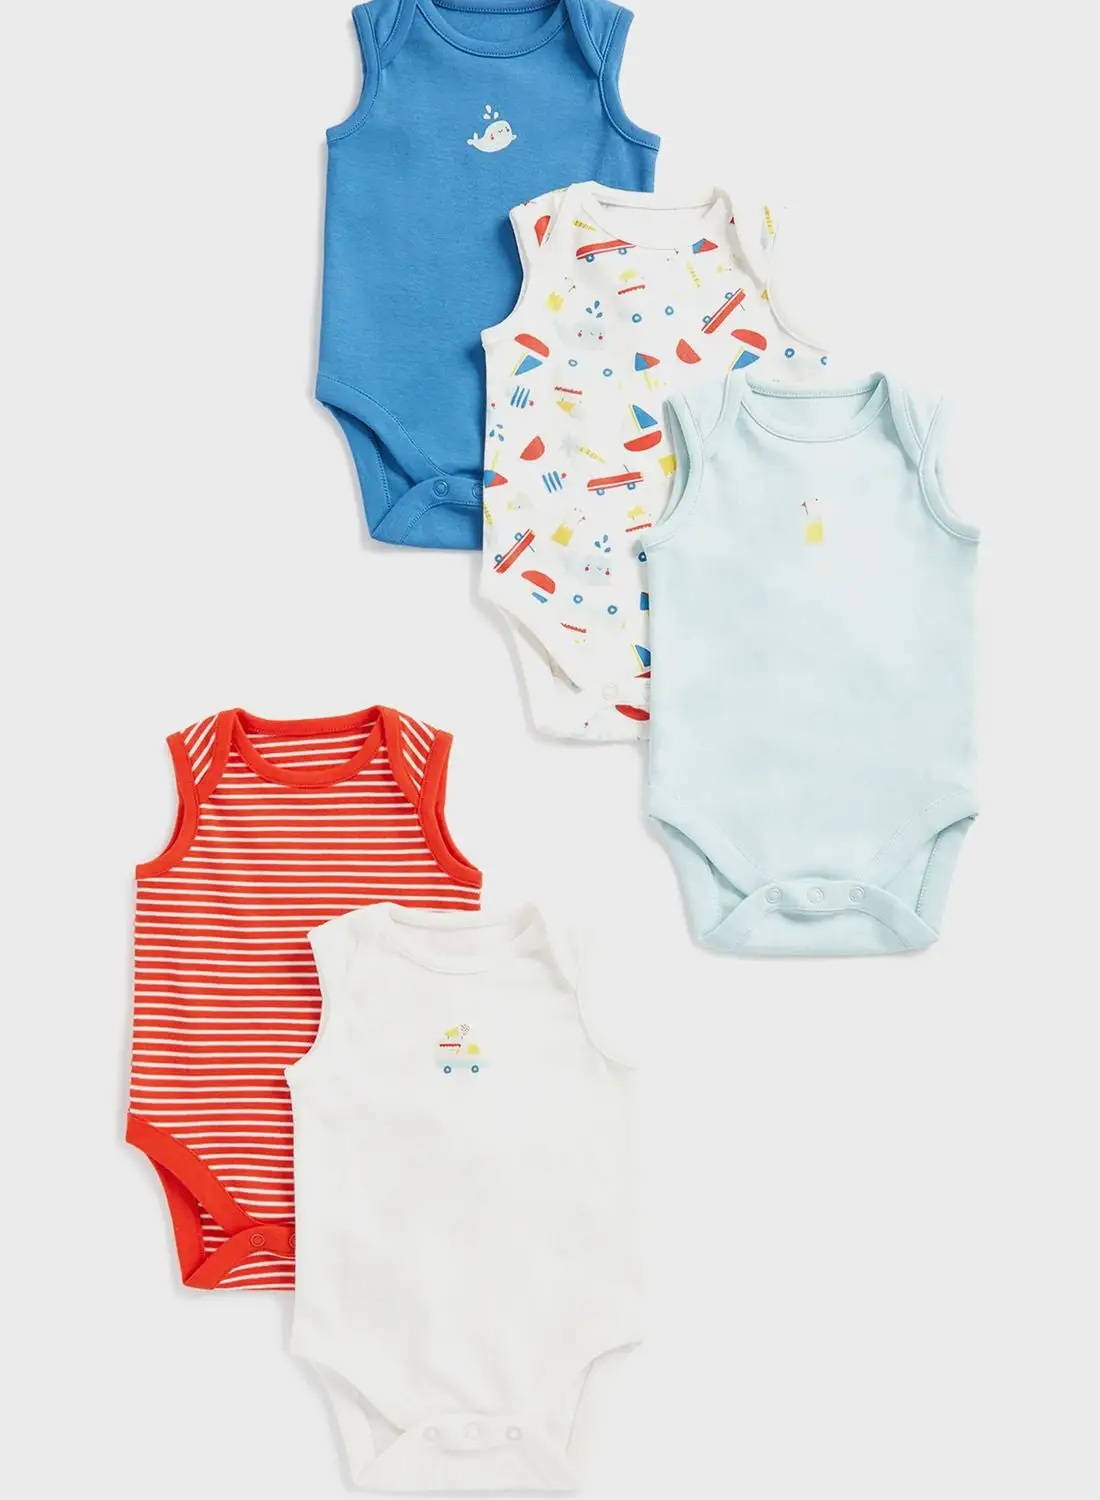 mothercare Kids 5 Pack Assorted Bodysuits